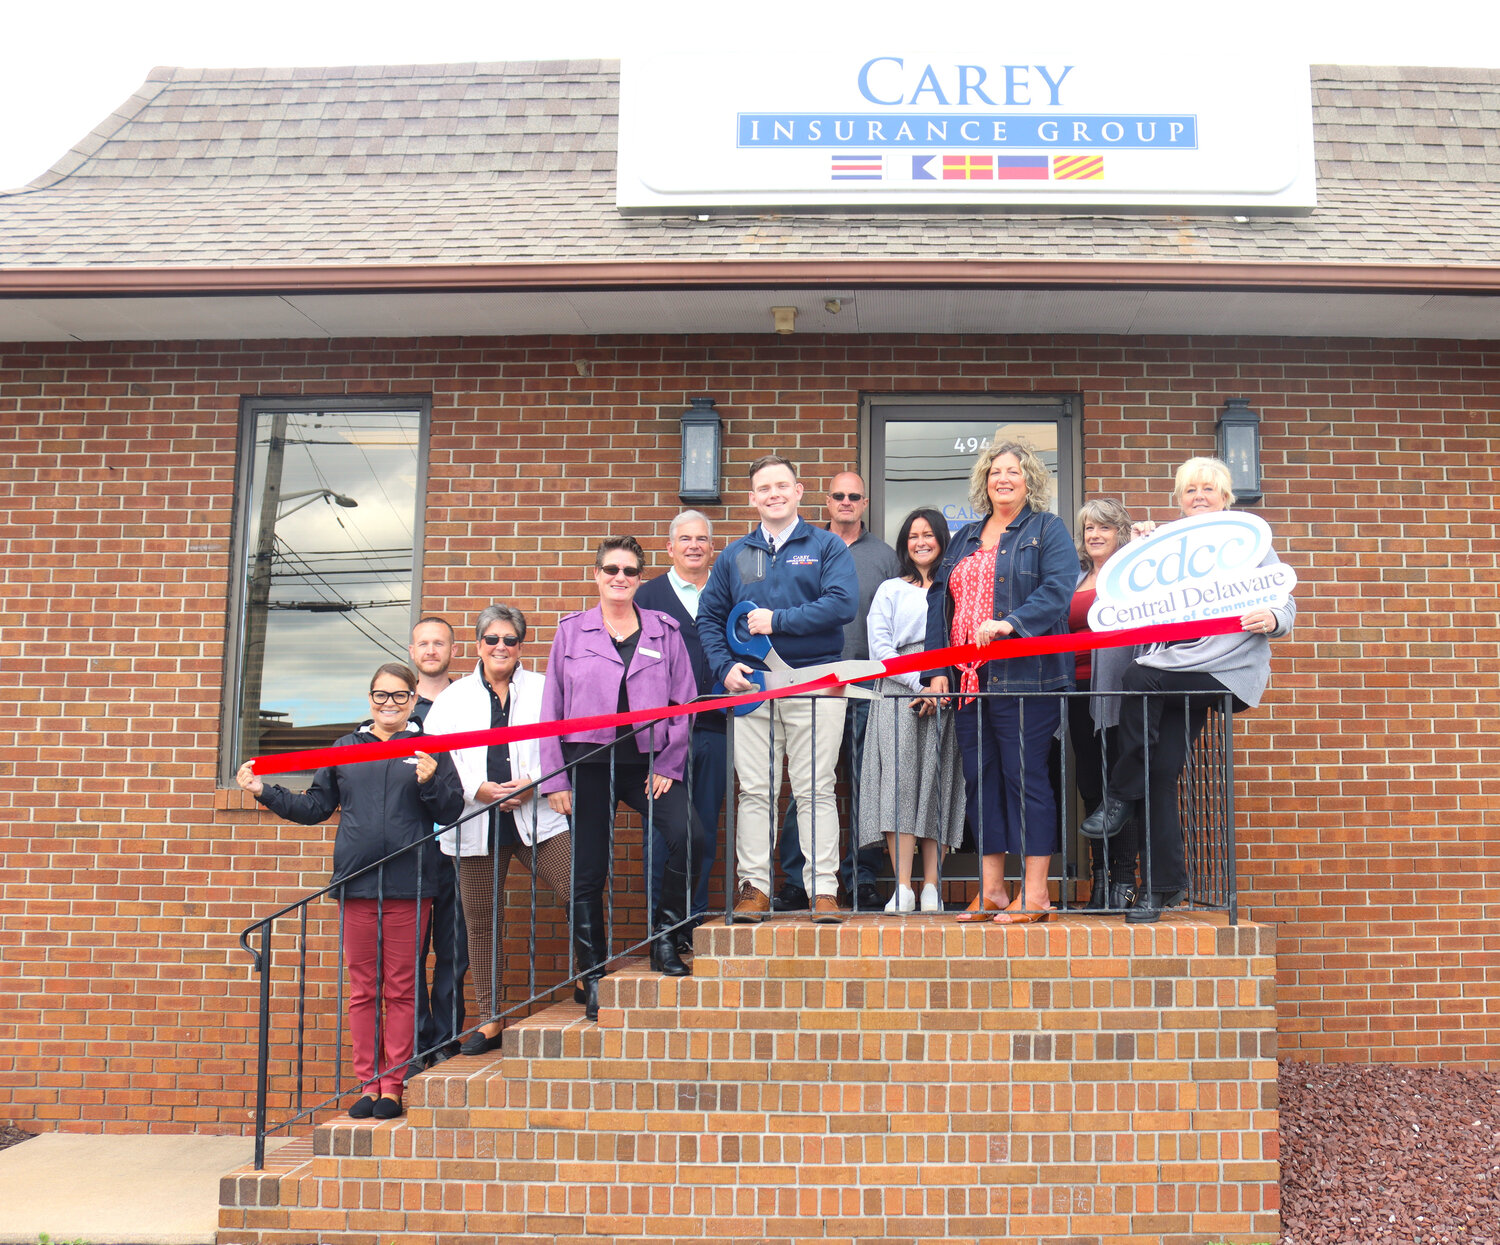 Central Delaware Chamber of Commerce members and friends joined the Carey Insurance Group team to celebrate the 4th anniversary of the Dover location.